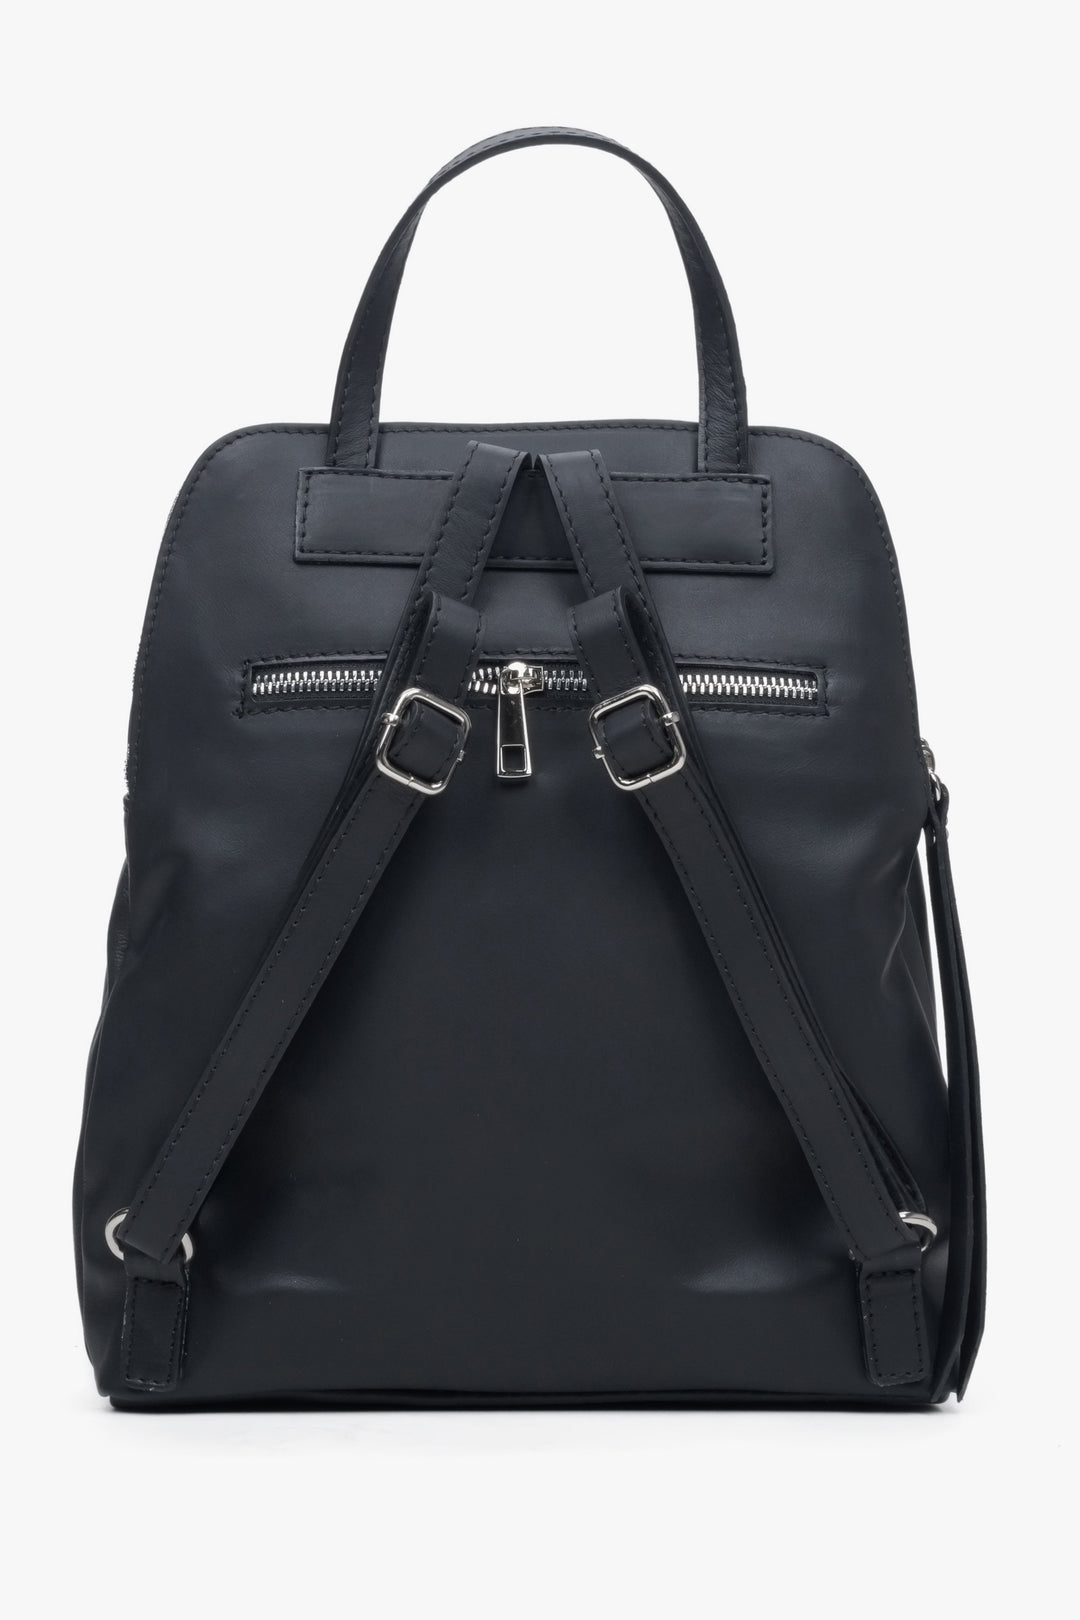 Women's leather black Estro backpack - close-up on the back of the model